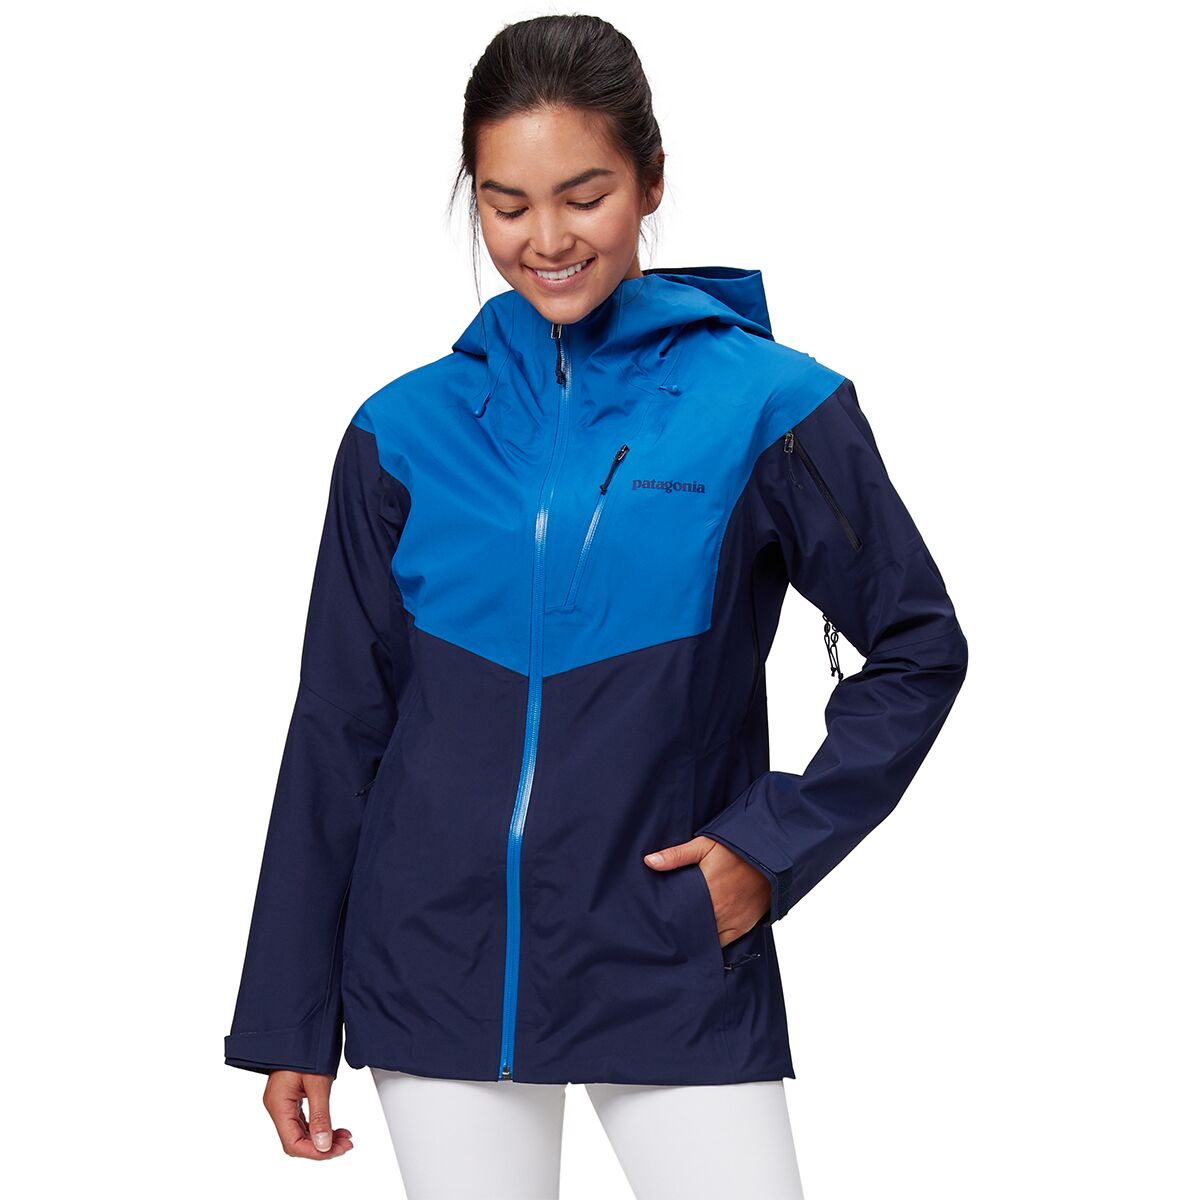 Snowdrifter Jacket - Women's by Patagonia | US-Parks.com